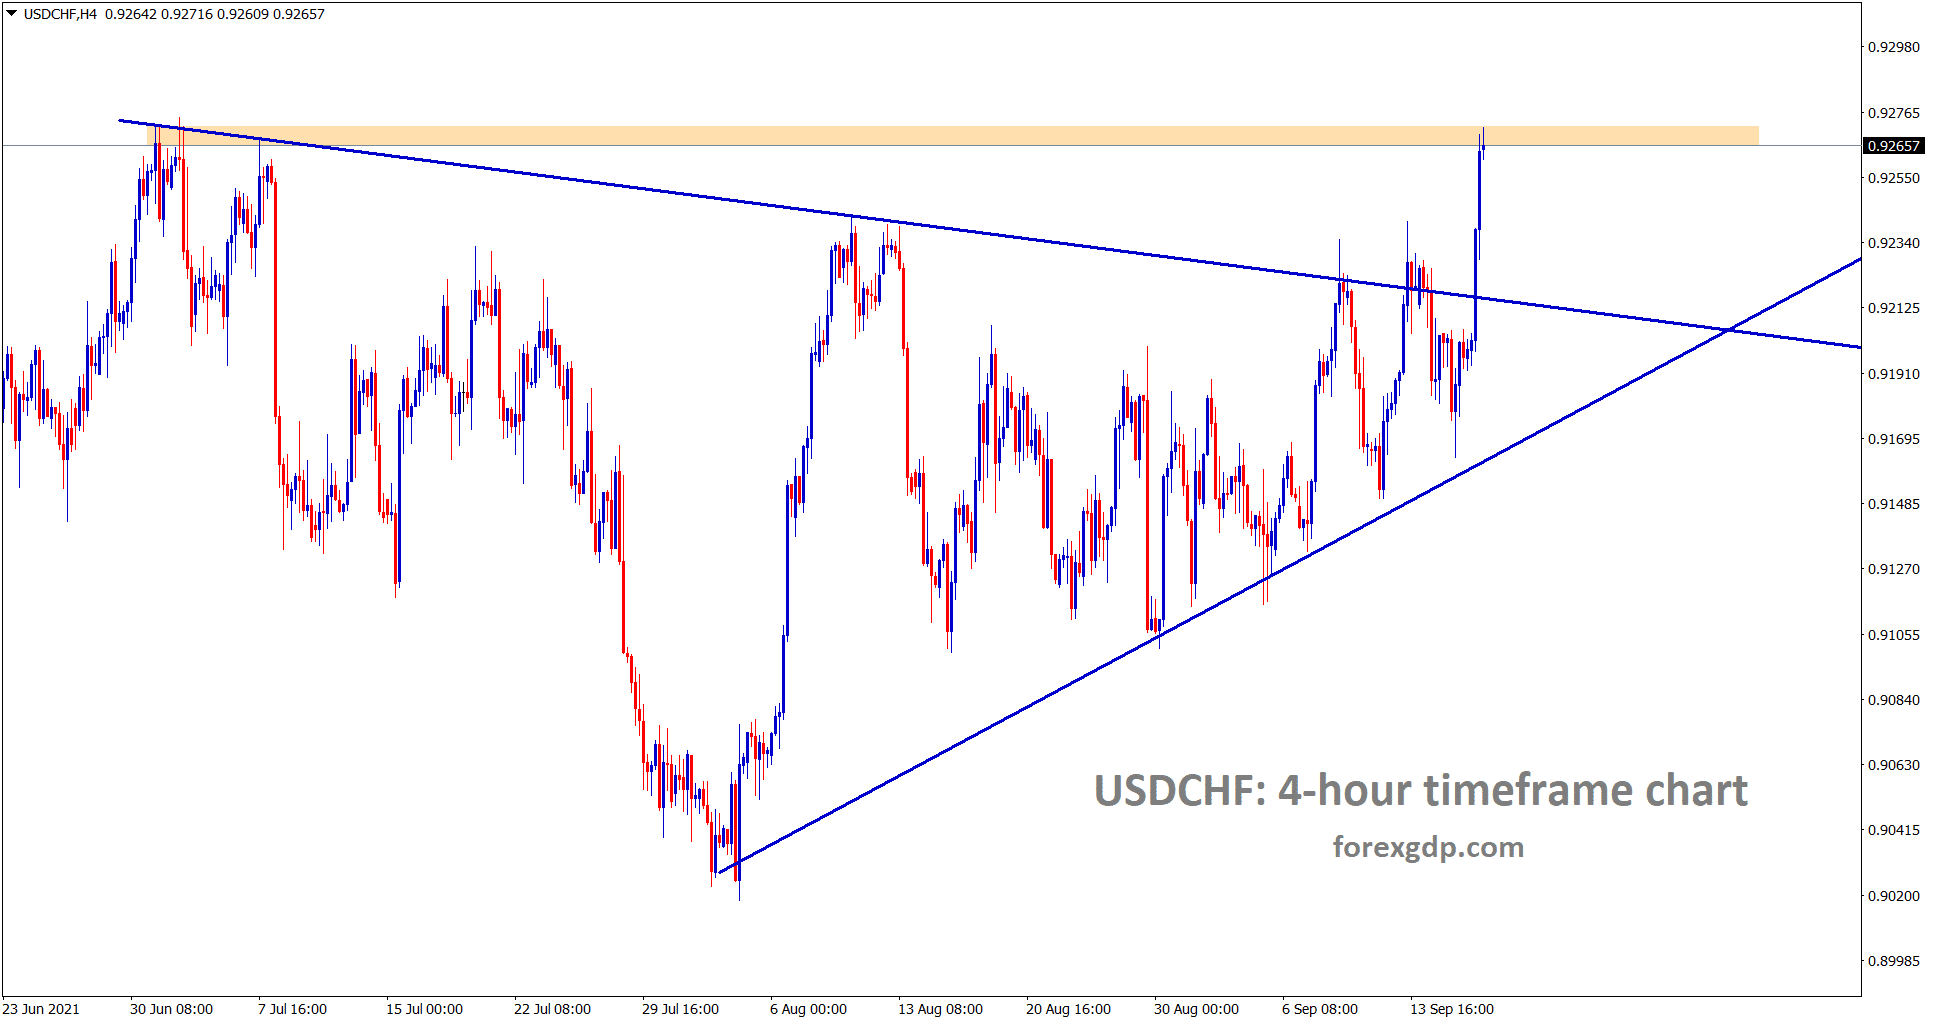 USDCHF has broken the top level of the symmetrical triangle and it hits the horizontal resistance area